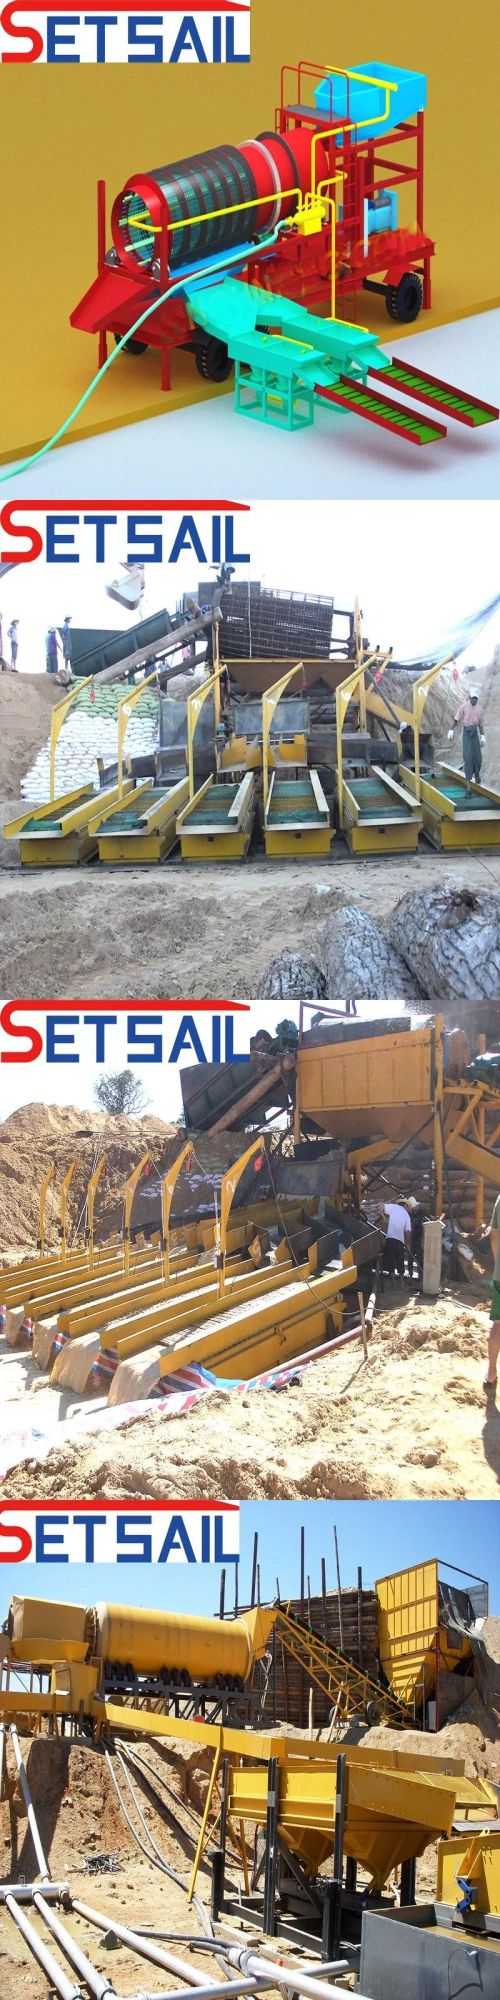 Hot Sale Land Mining Device with Gold and Diamond Selection Machinery